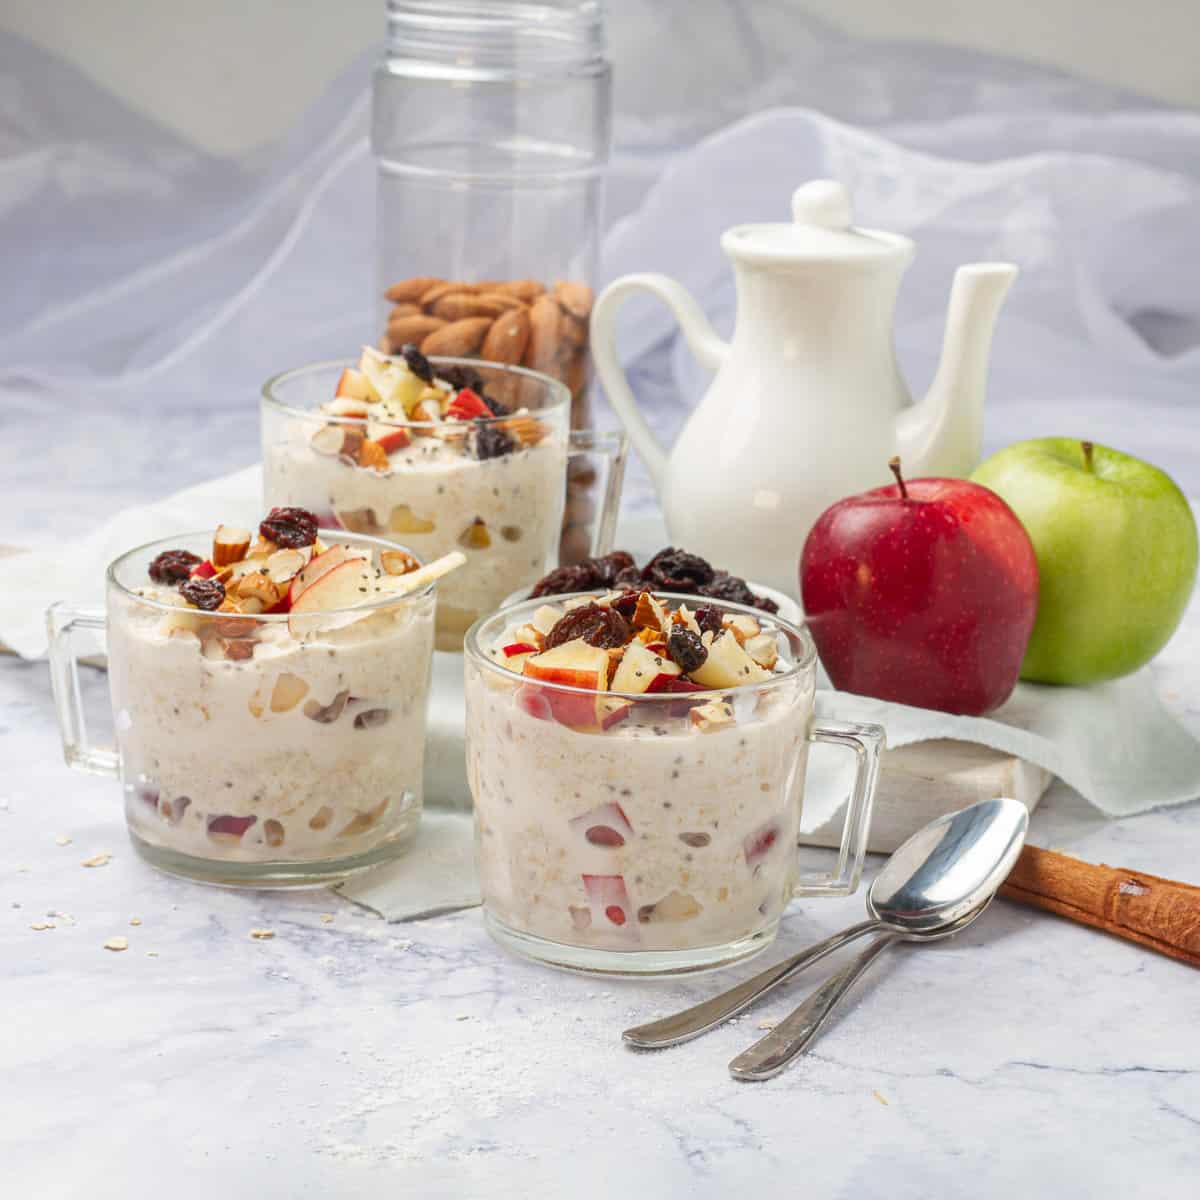 Creamy and nutritious apple overnight oats with fresh fruit and nuts.